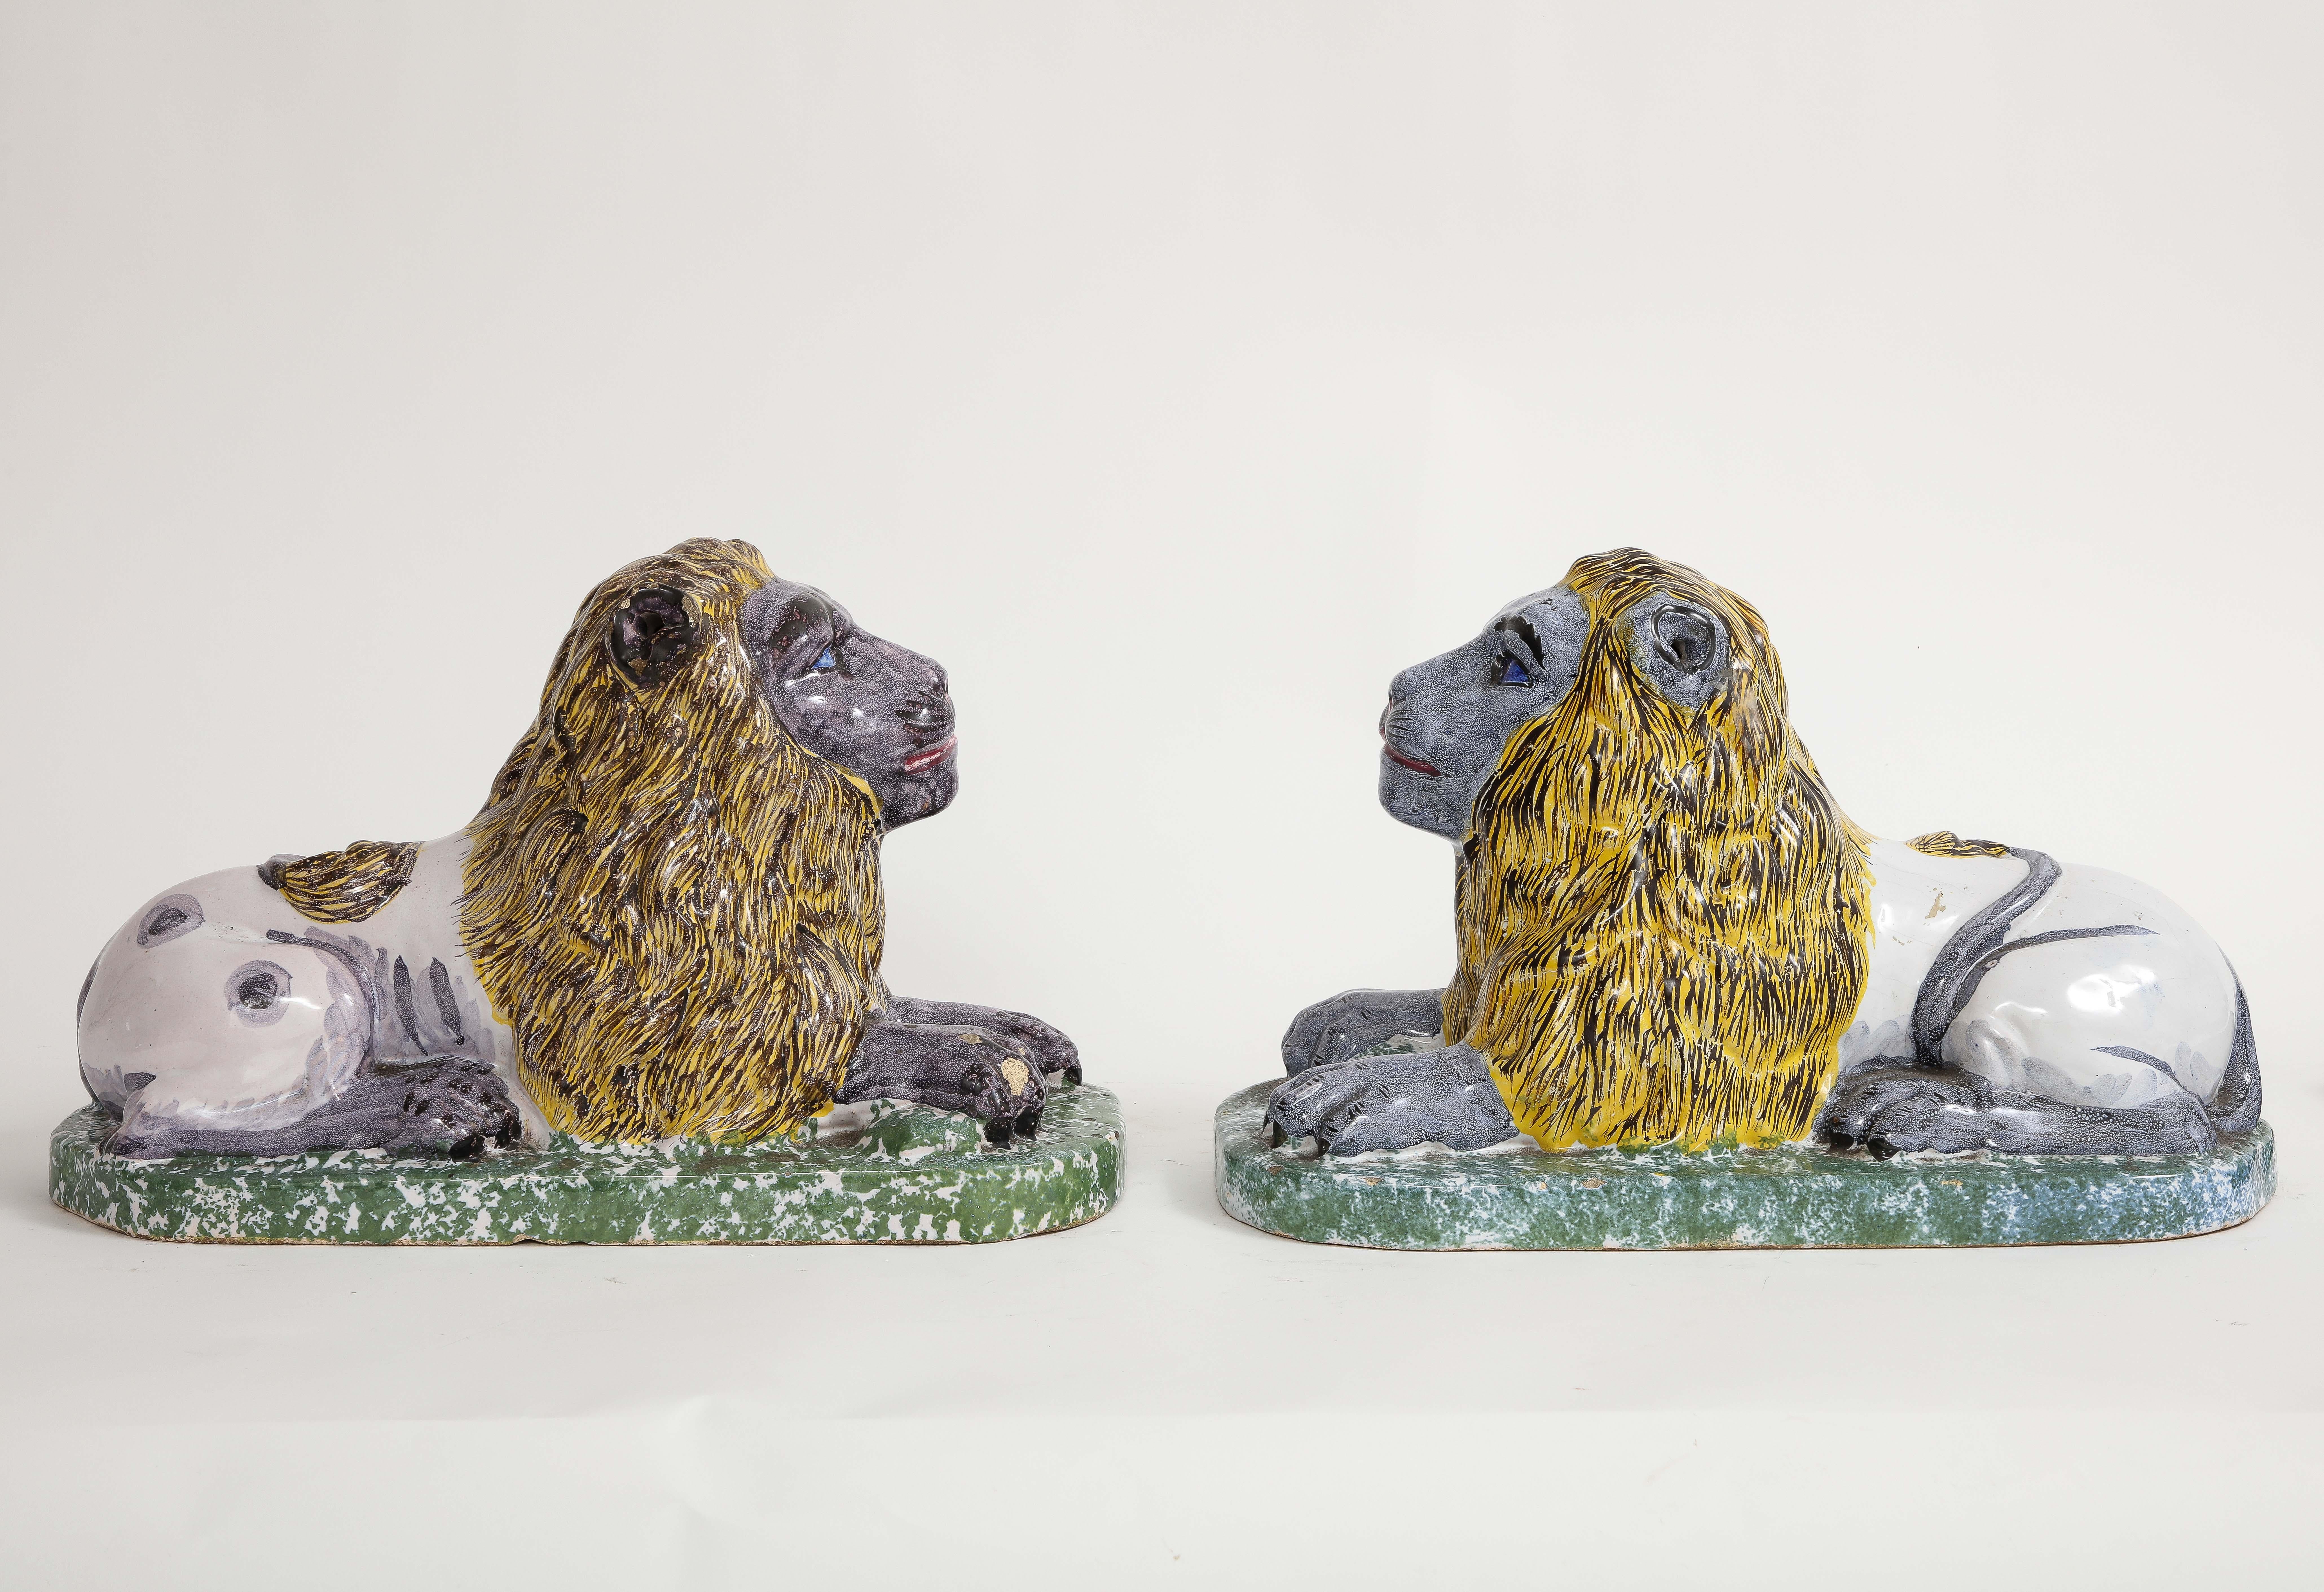 A Pair of 19th century French Majolica/Fiance Models of Lions Perched on stands. Each is wonderfully hand painted in vibrant purple and blue colorways. The bases are green and each is naturalistically looking forward perched on a rectangular